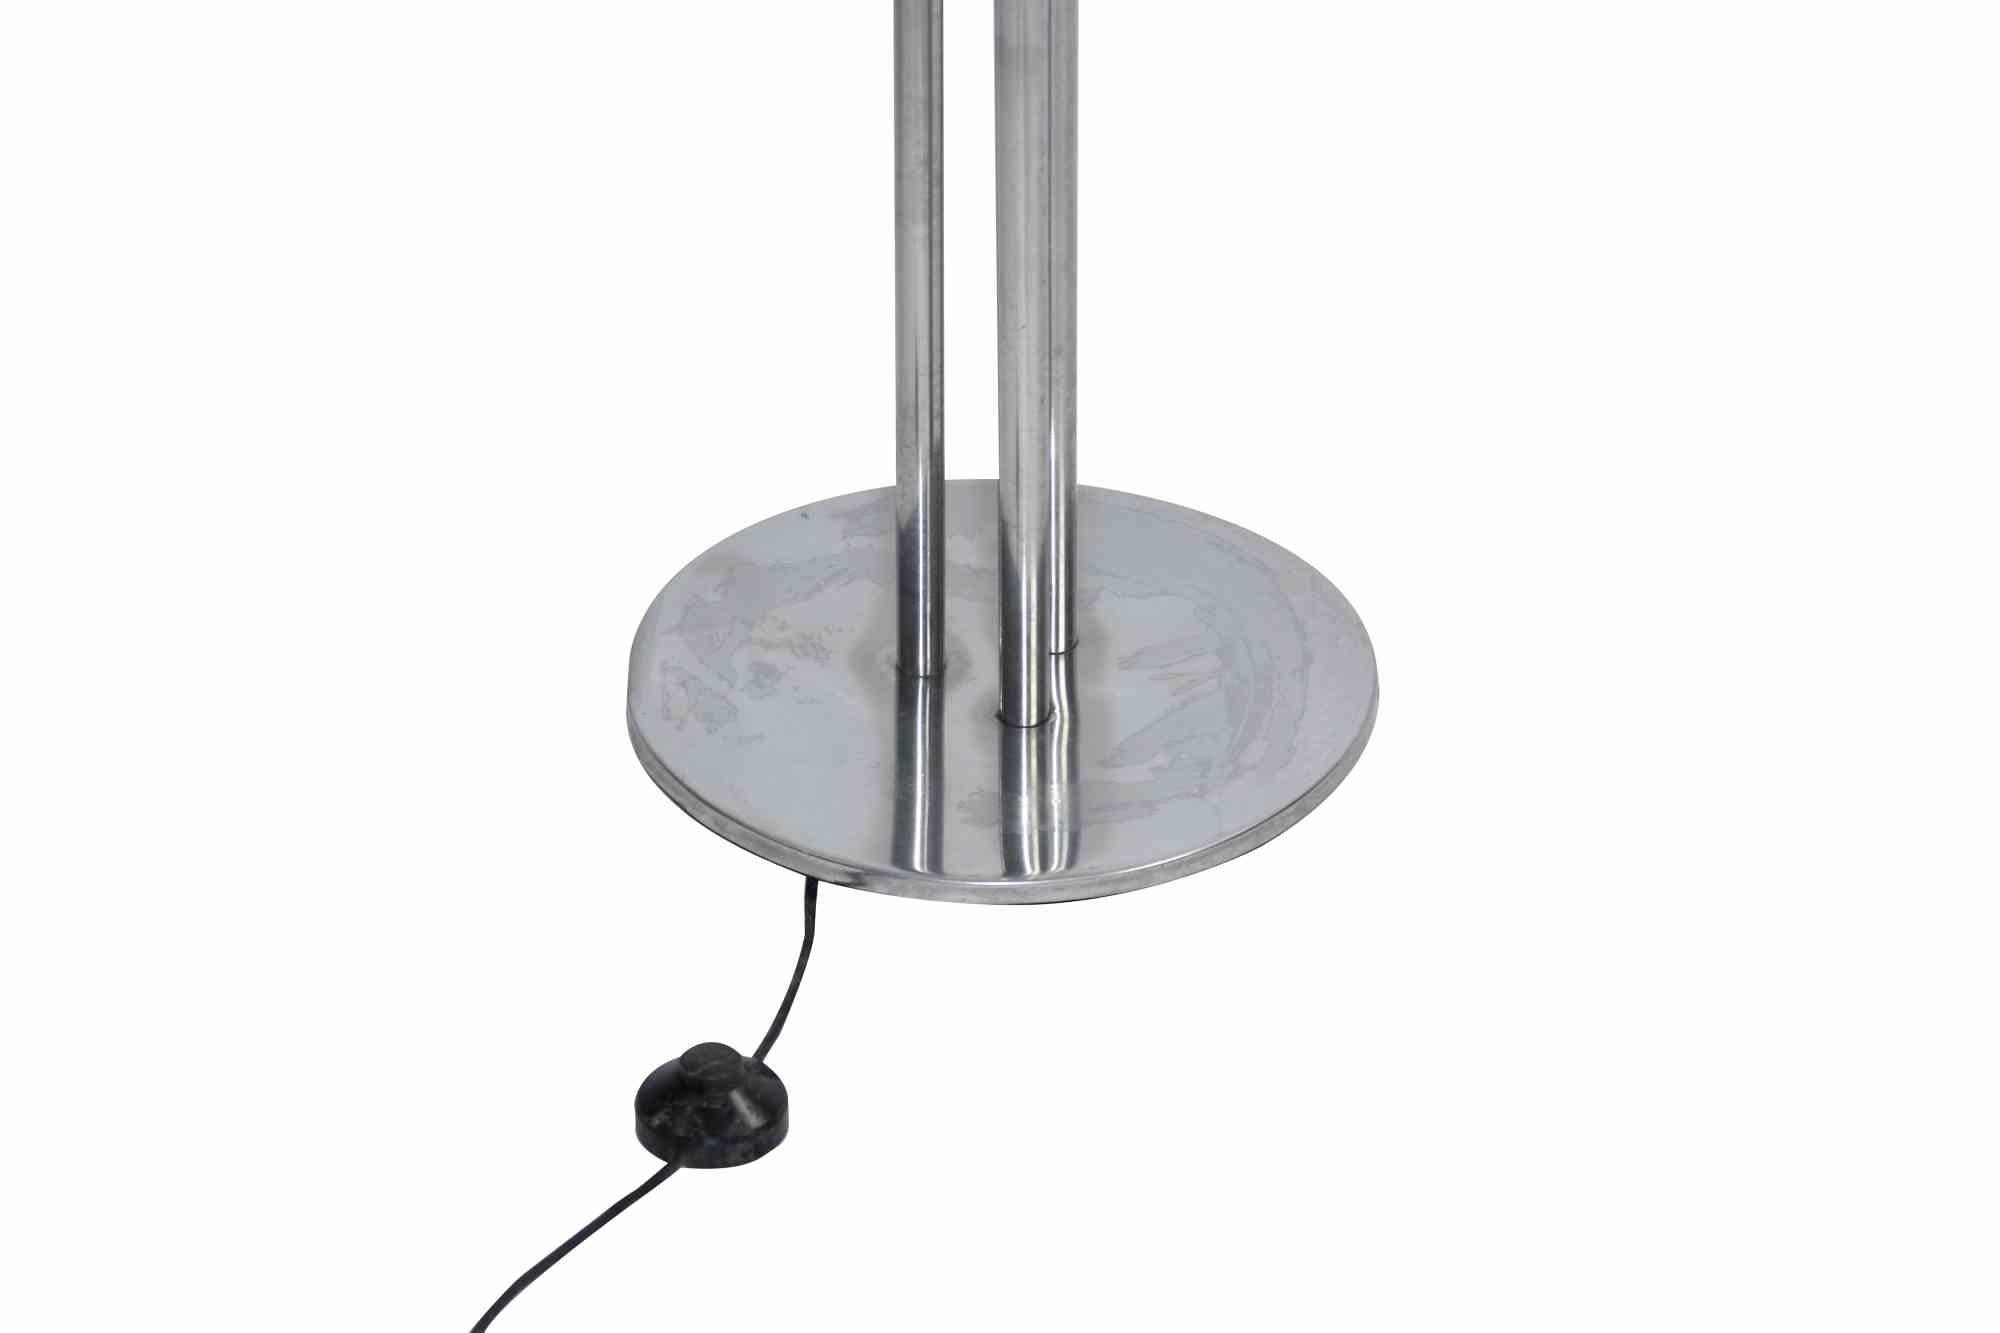 Italian chromed steel floor lamp is an original decorative lamp realized by Goffredo Reggiani in the 1970s.

Arched lamp with three arms, with round cast iron base (32.5 cm) central stem in chromed steel from which depart three adjustable arches